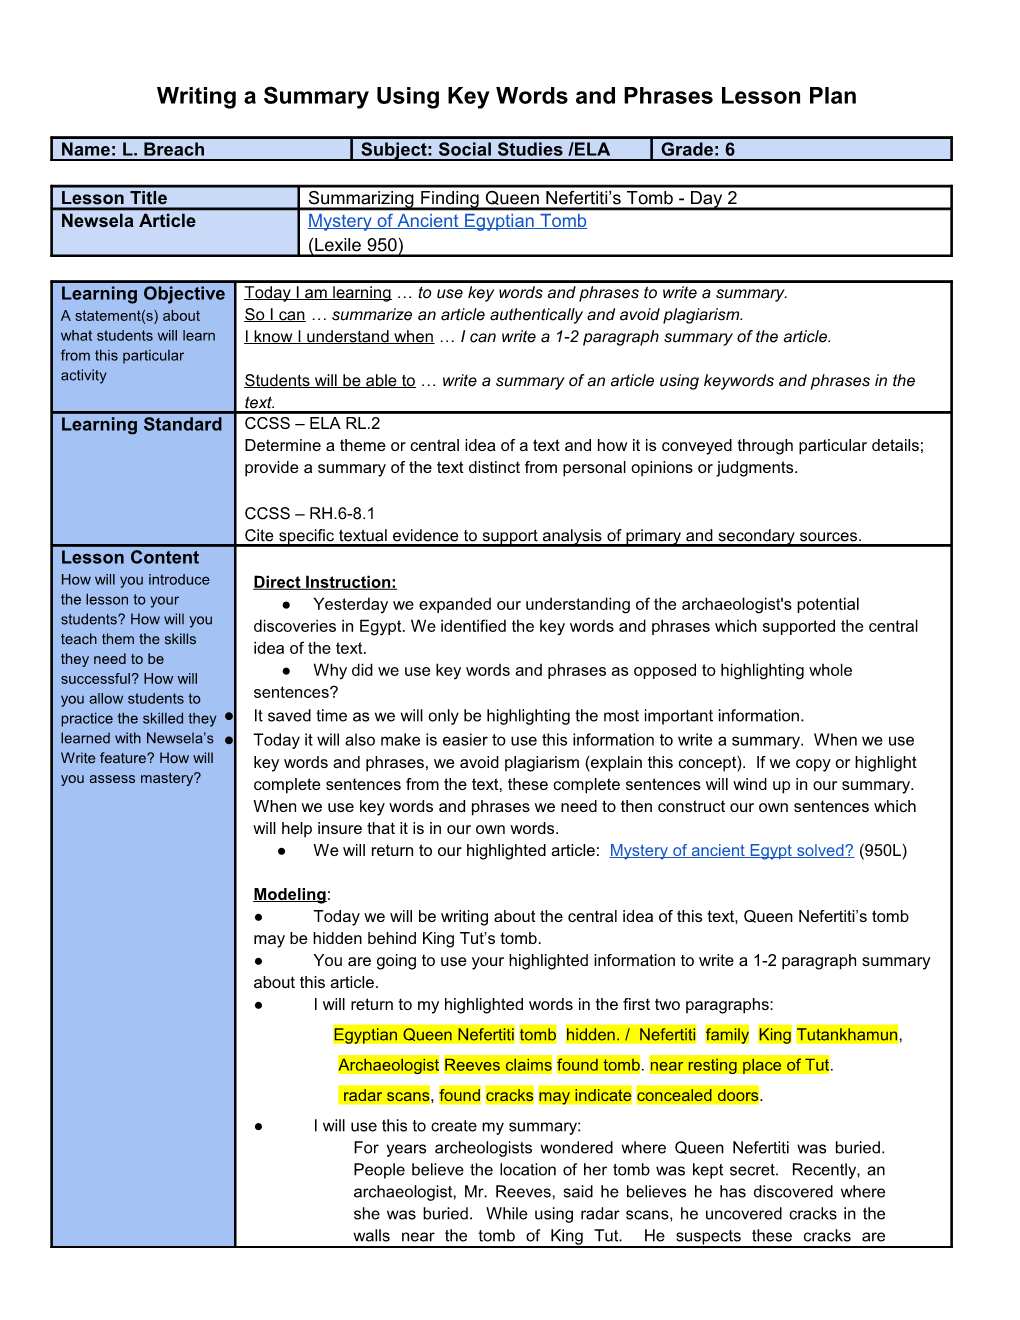 Writing a Summary Using Key Words and Phrases Lesson Plan